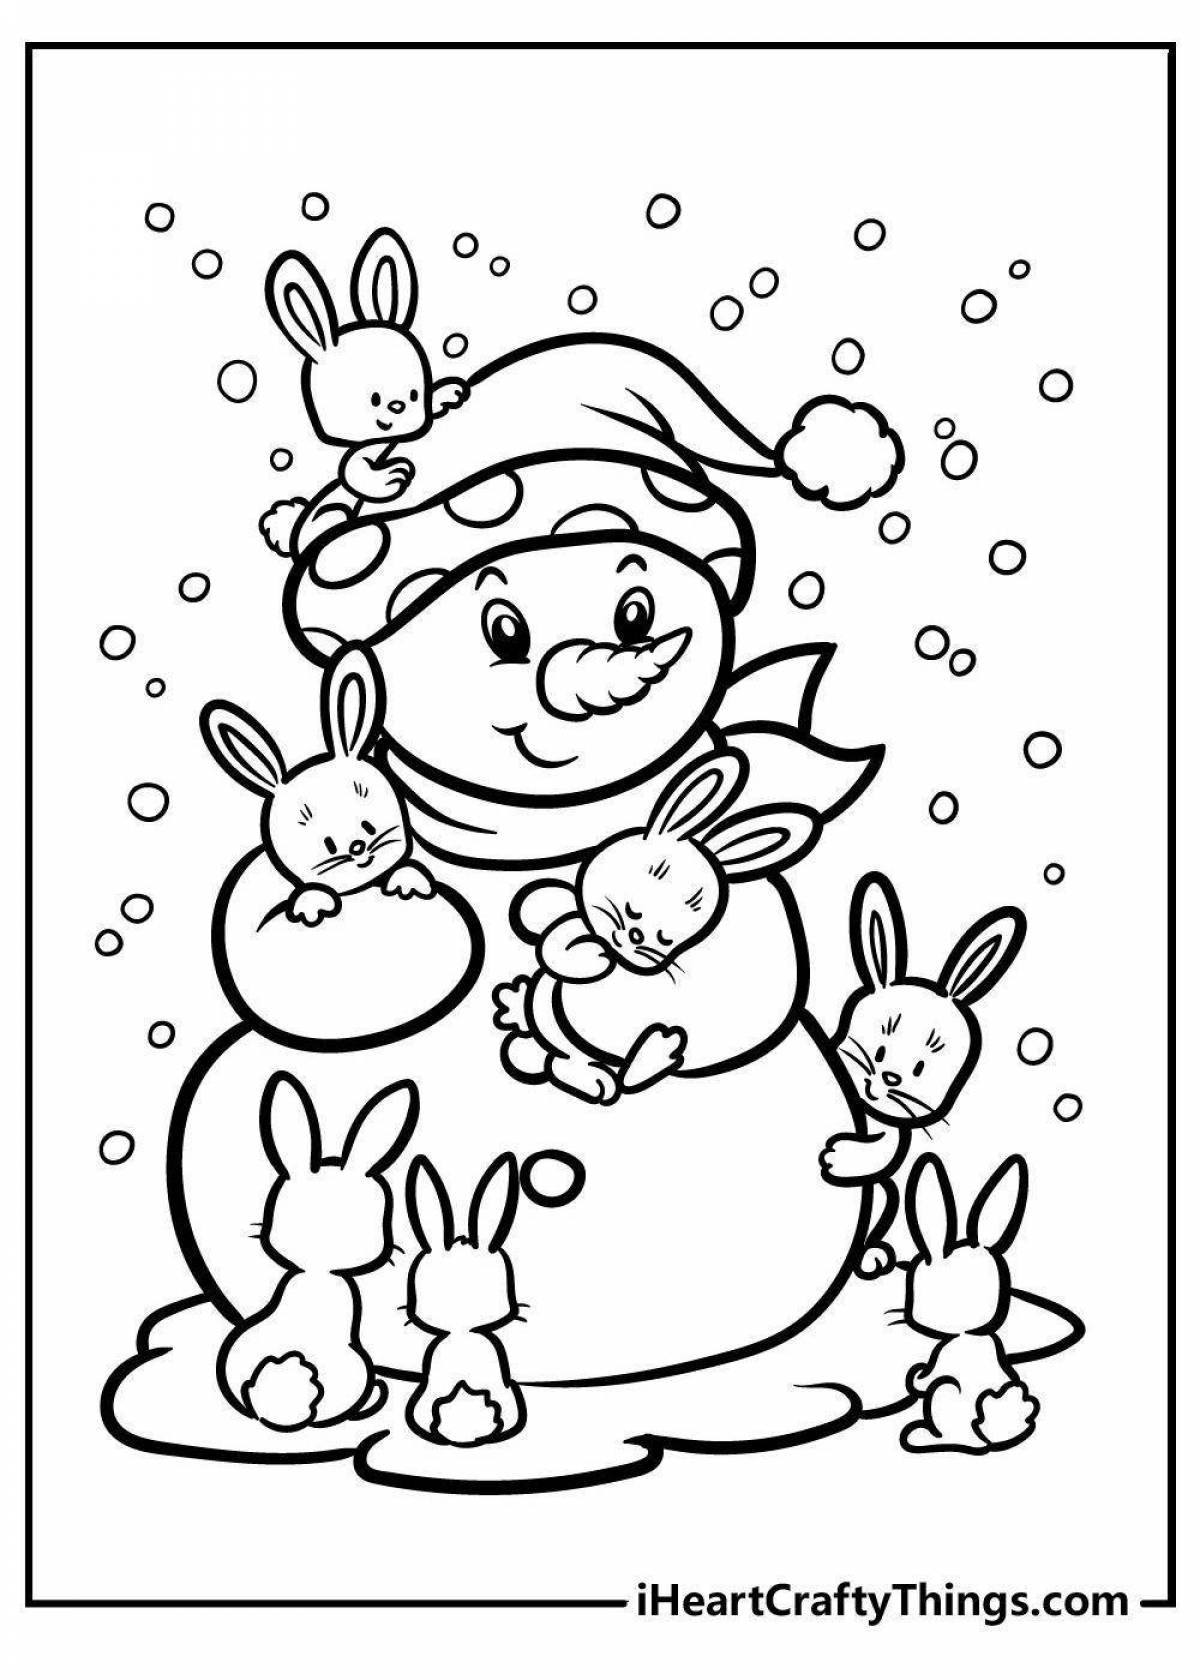 Happy coloring rabbit in a hat